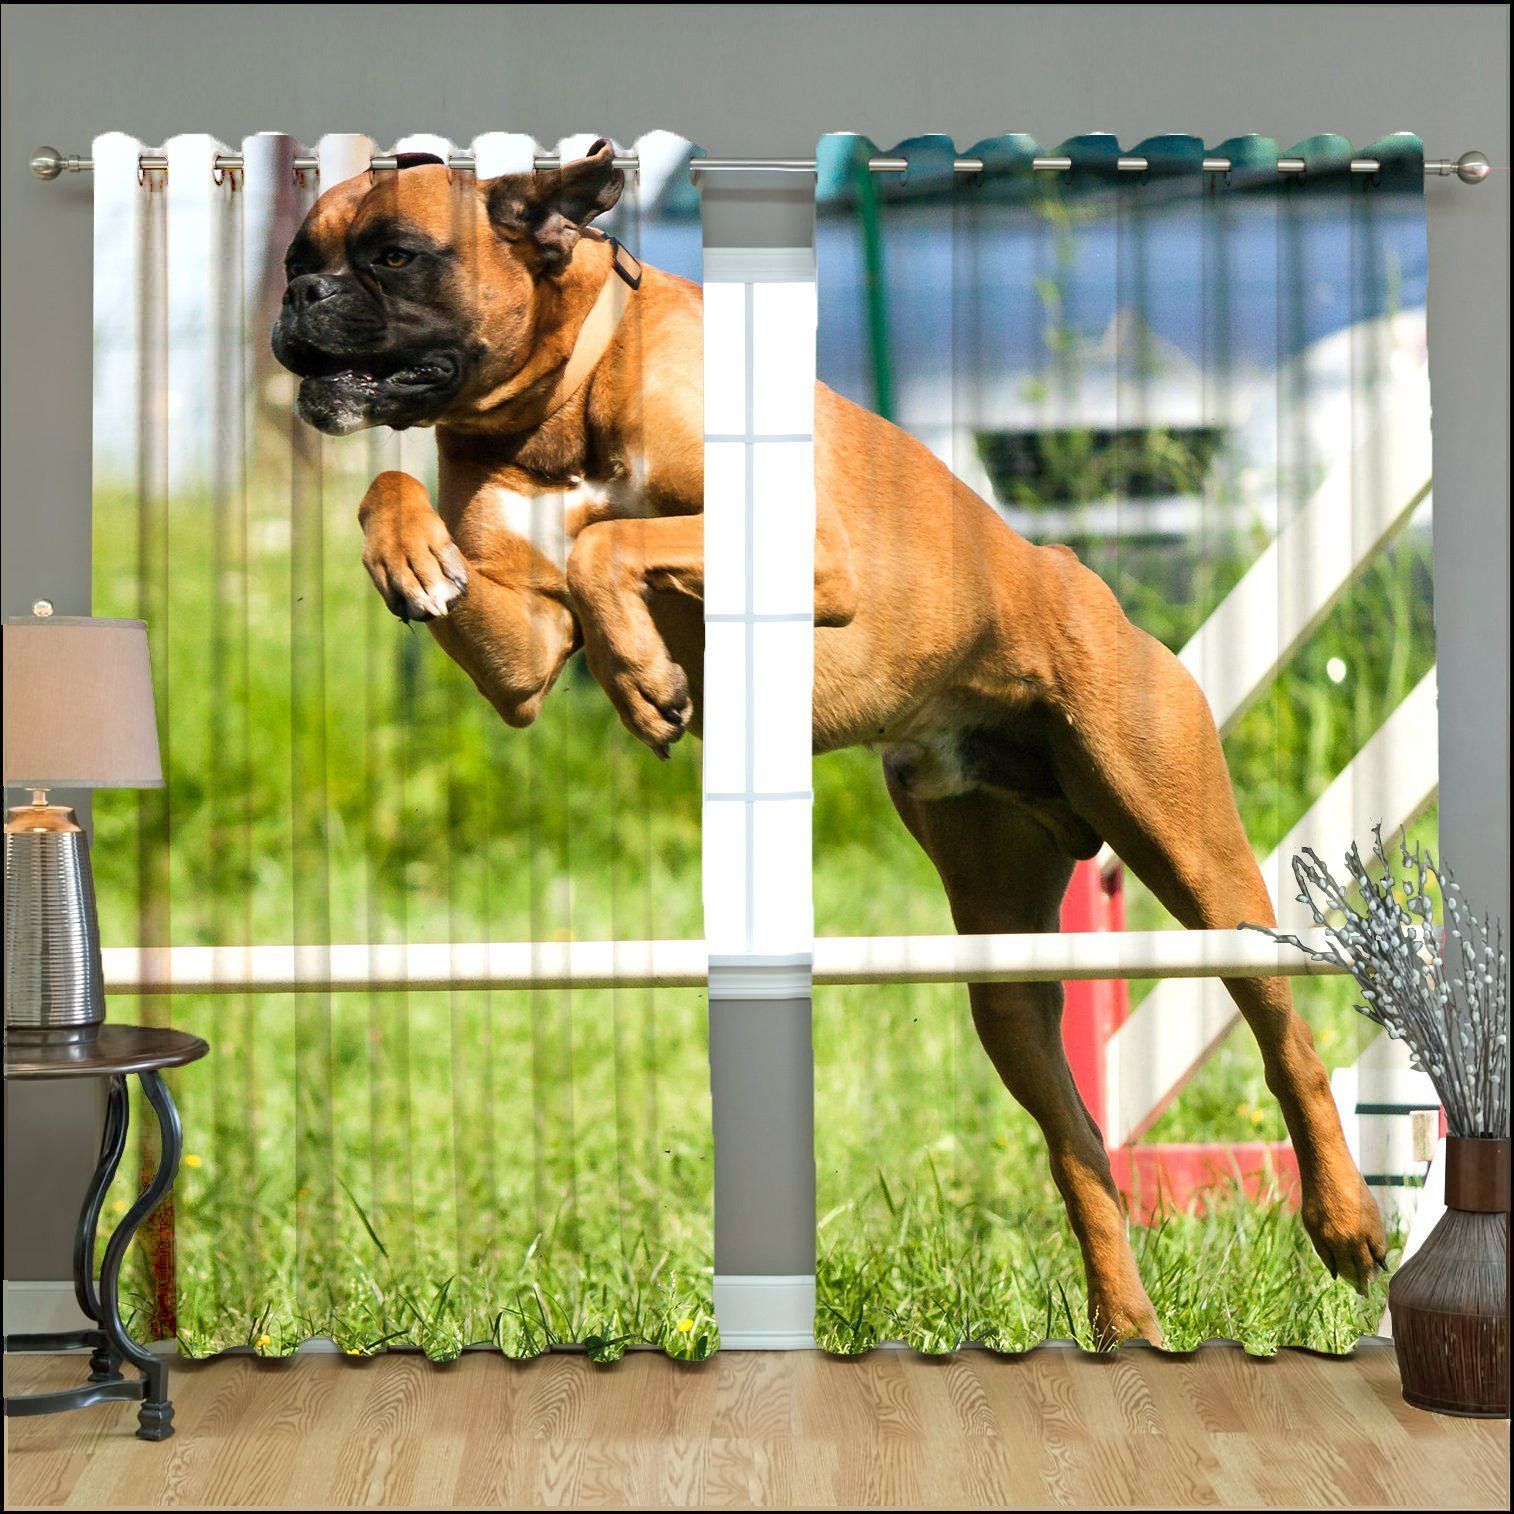 Boxer Dog Overcome The Obstacle Printed Window Curtain